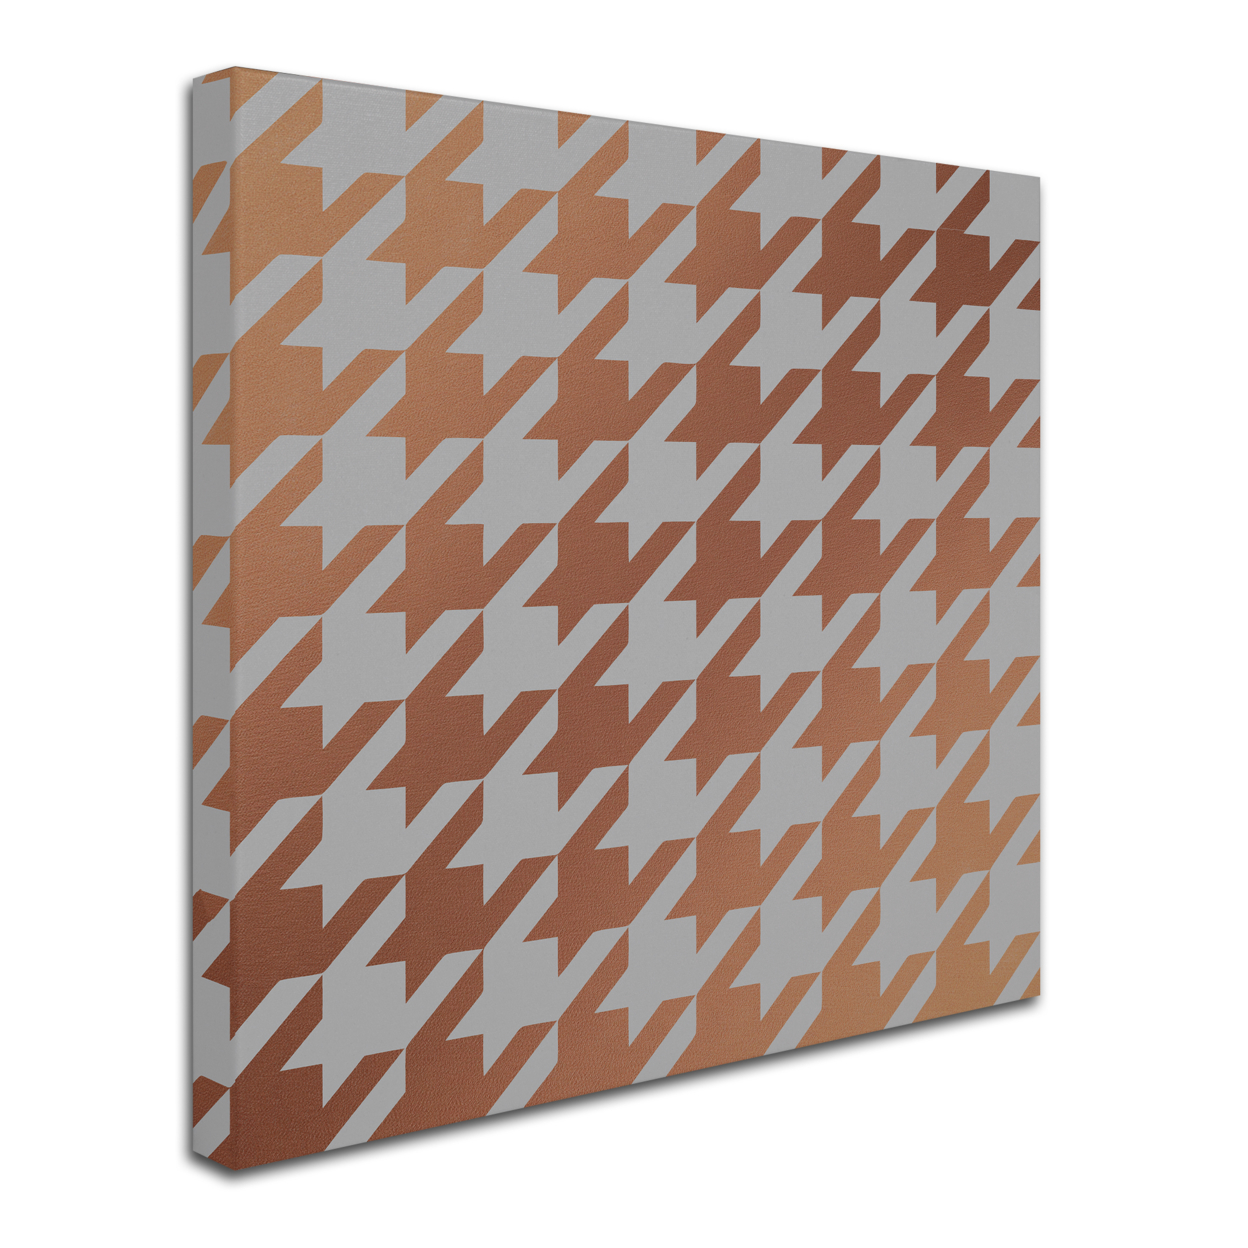 Color Bakery 'Xmas Houndstooth 4' Huge Canvas Art 35 X 35